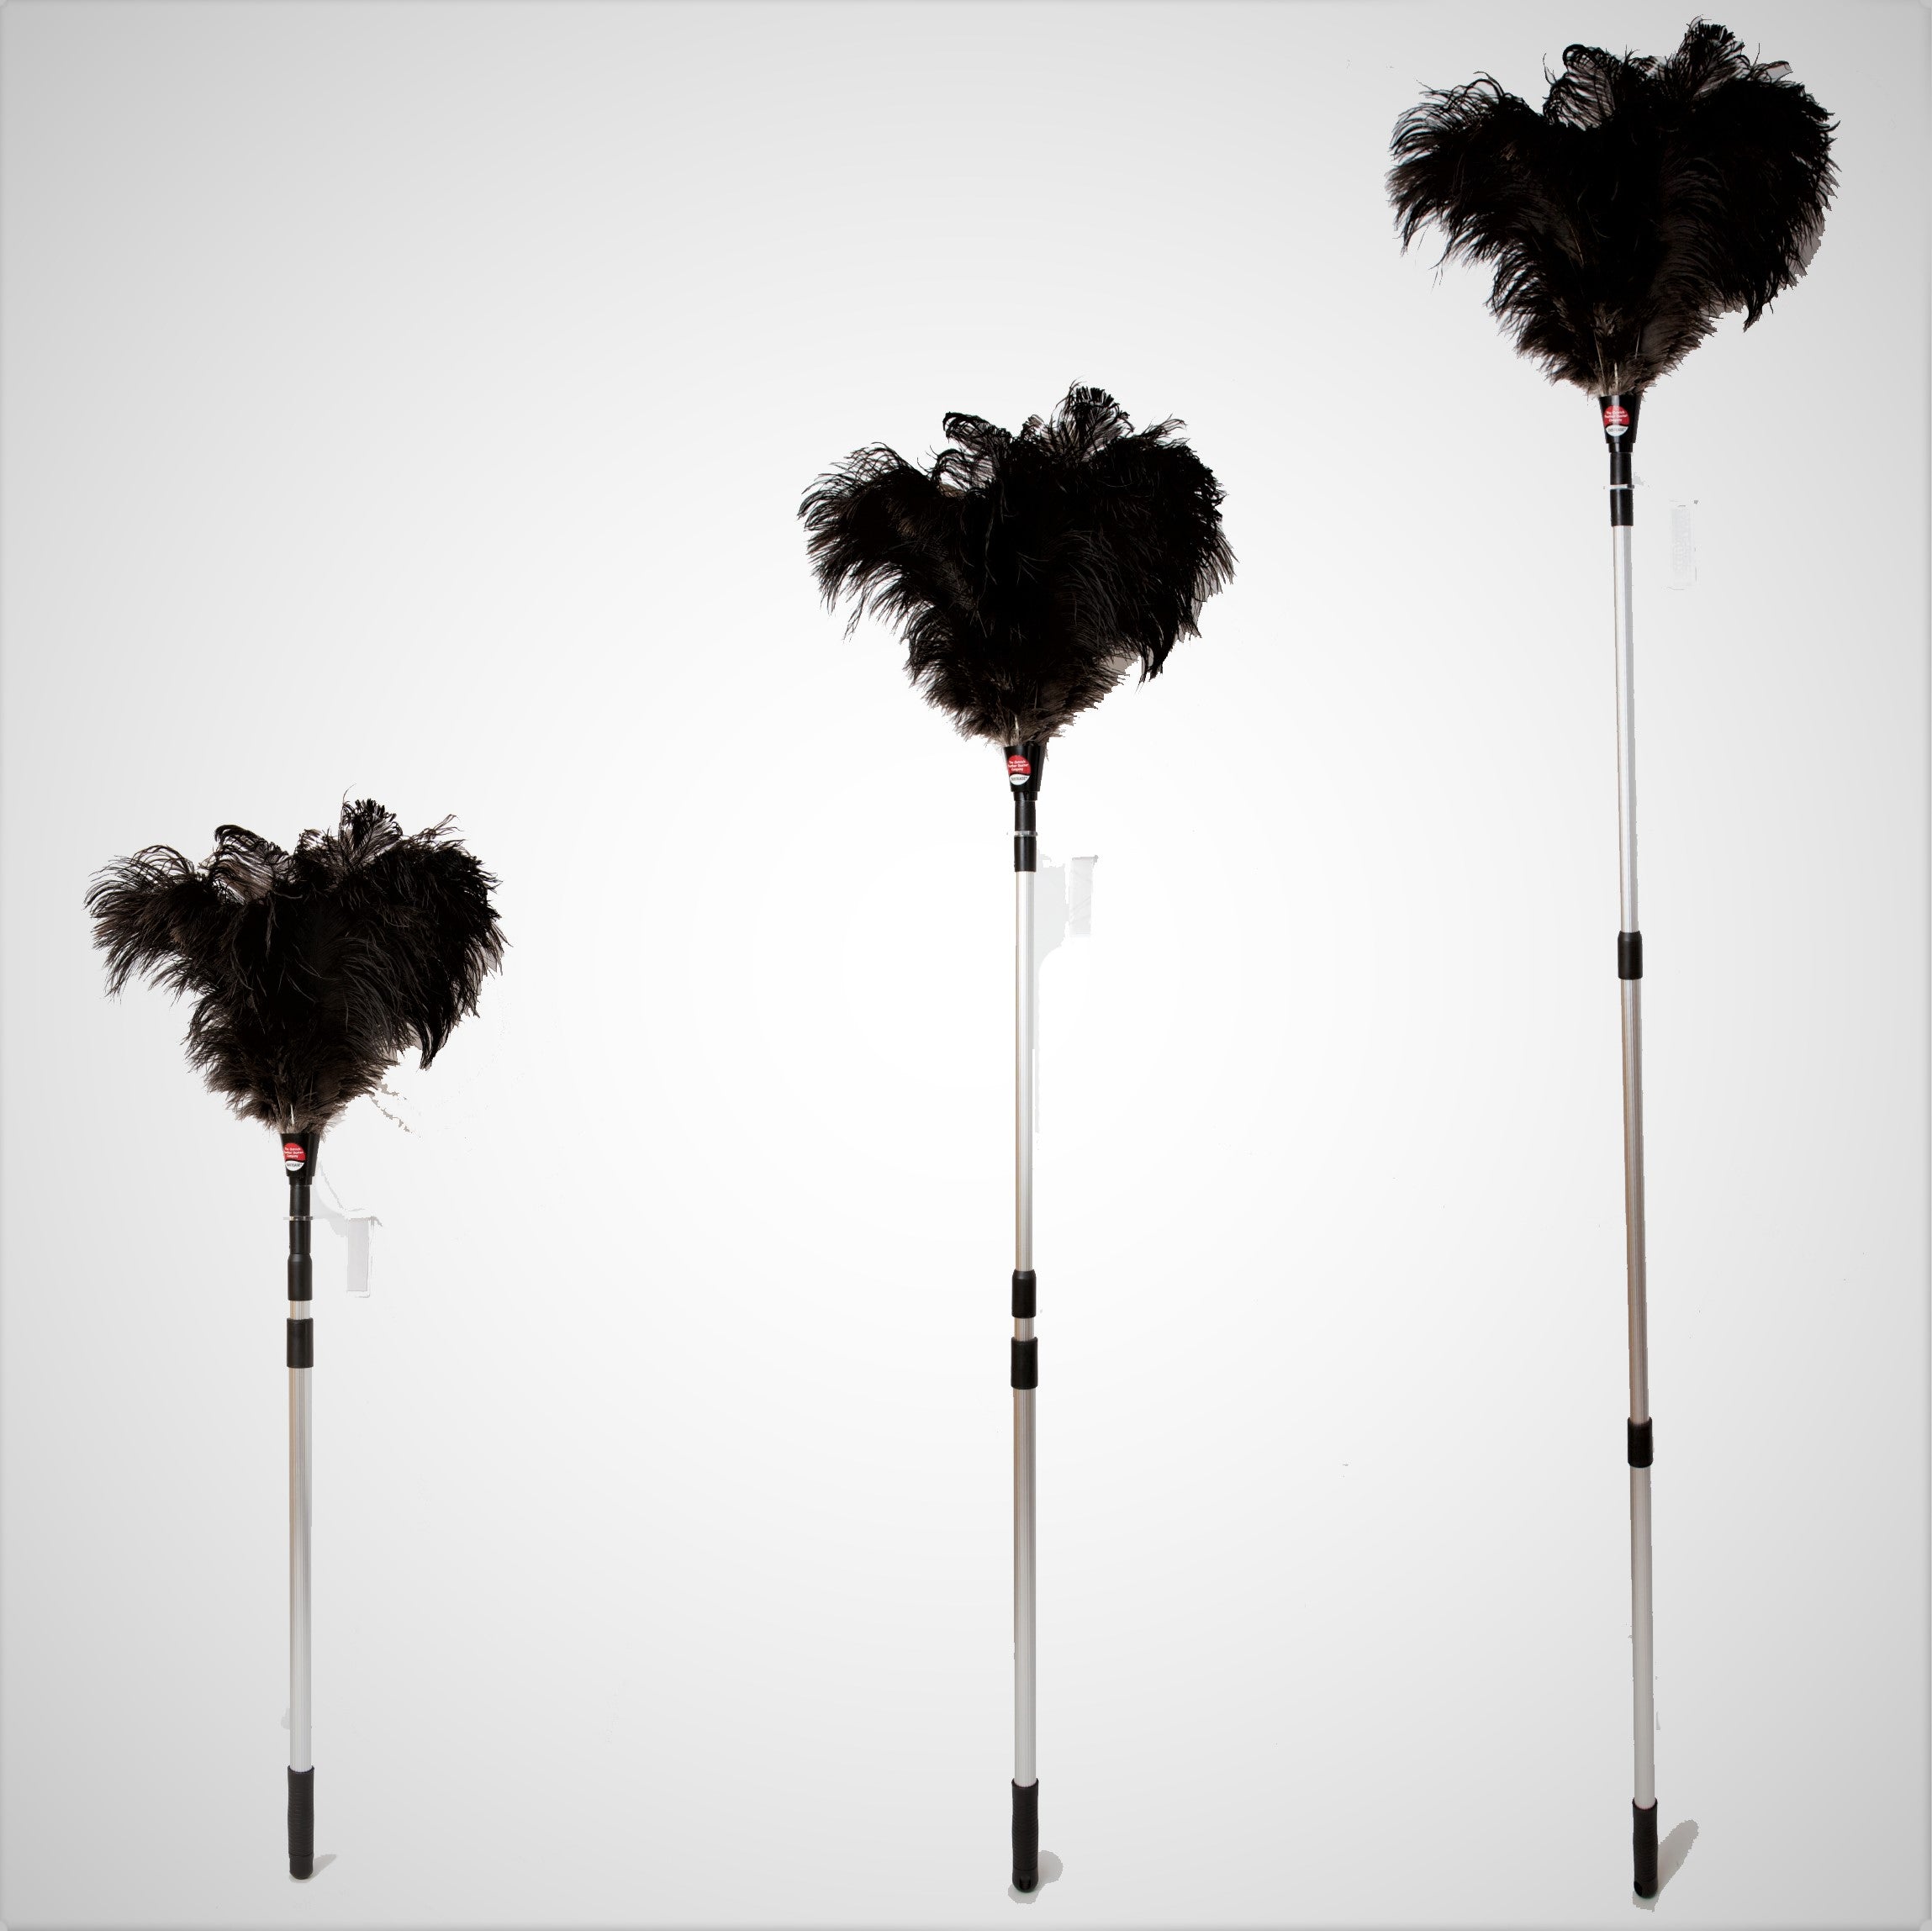 Fabulous Ostrich Feather Dusters- 4 sizes The Eco way to dust-Sustainably Sourced